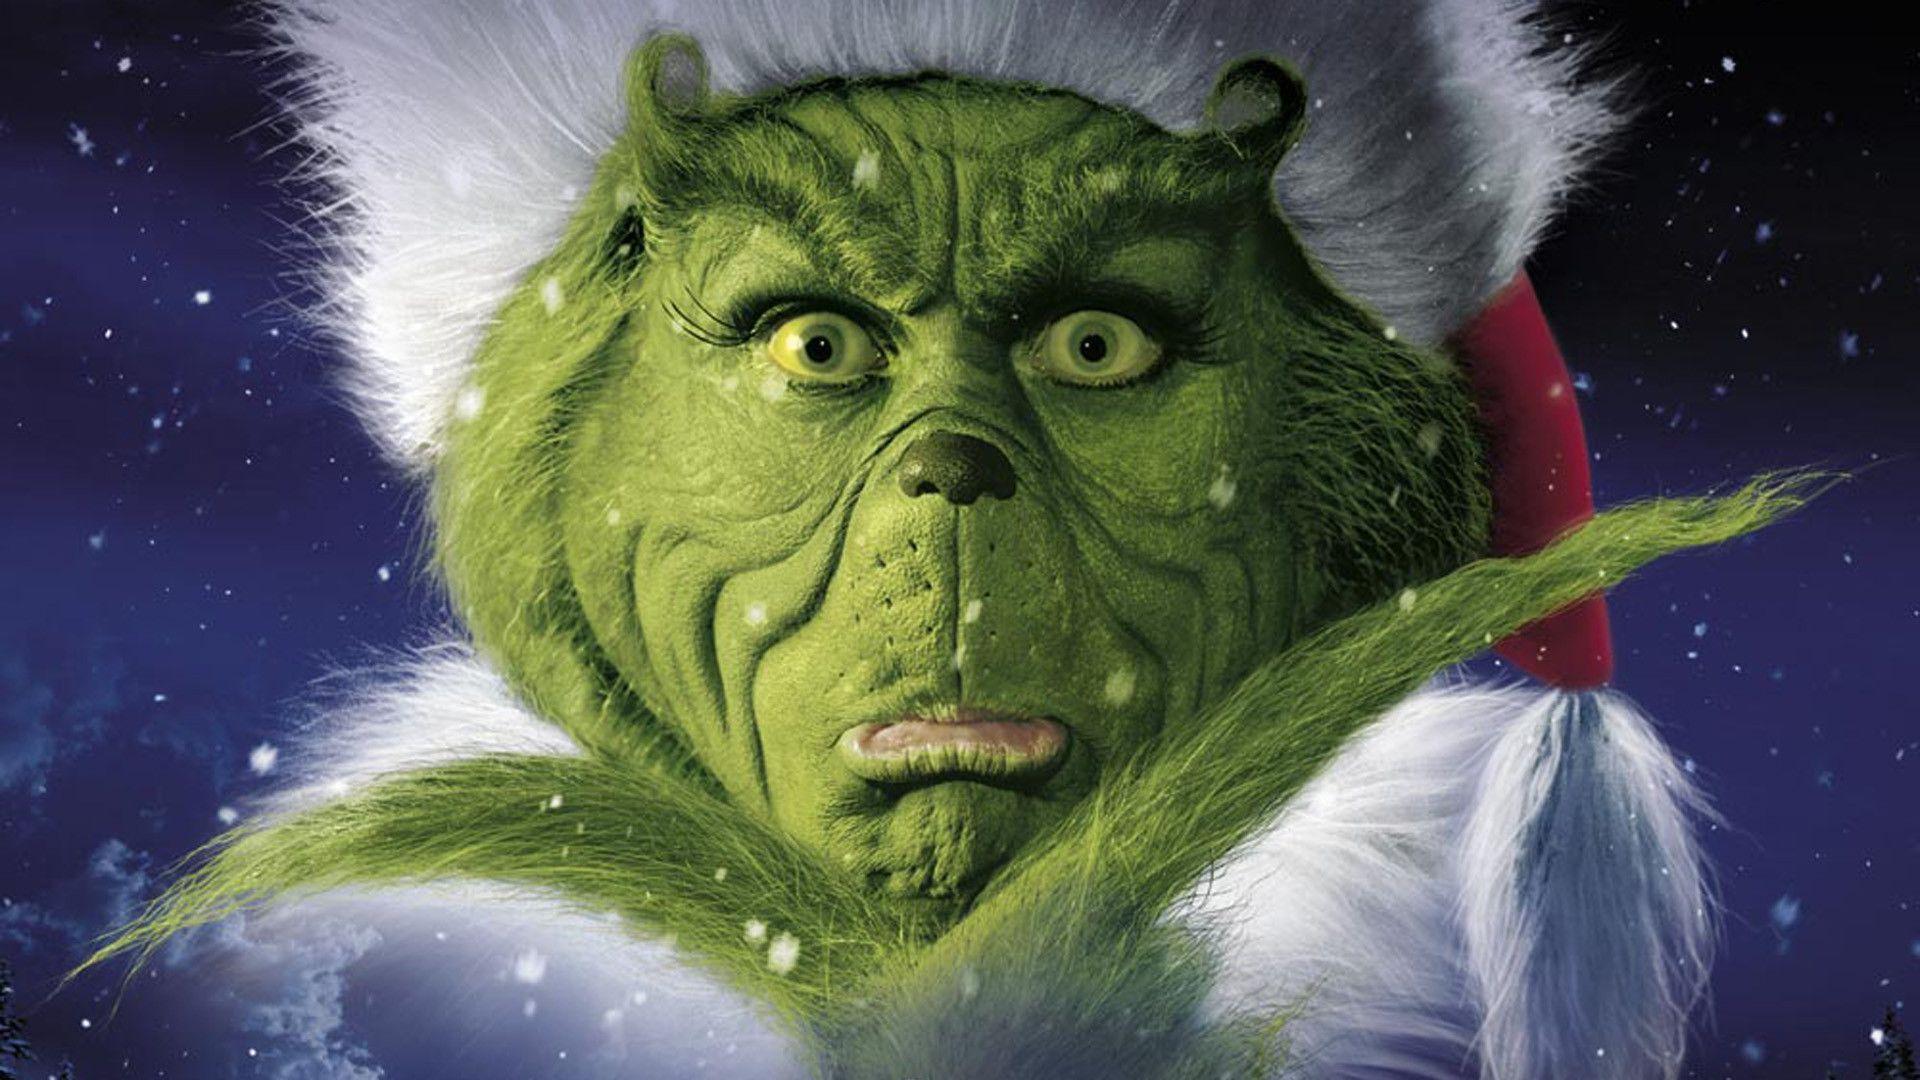 The Grinch Christmas Wallpaper. Free Wallpaper Image